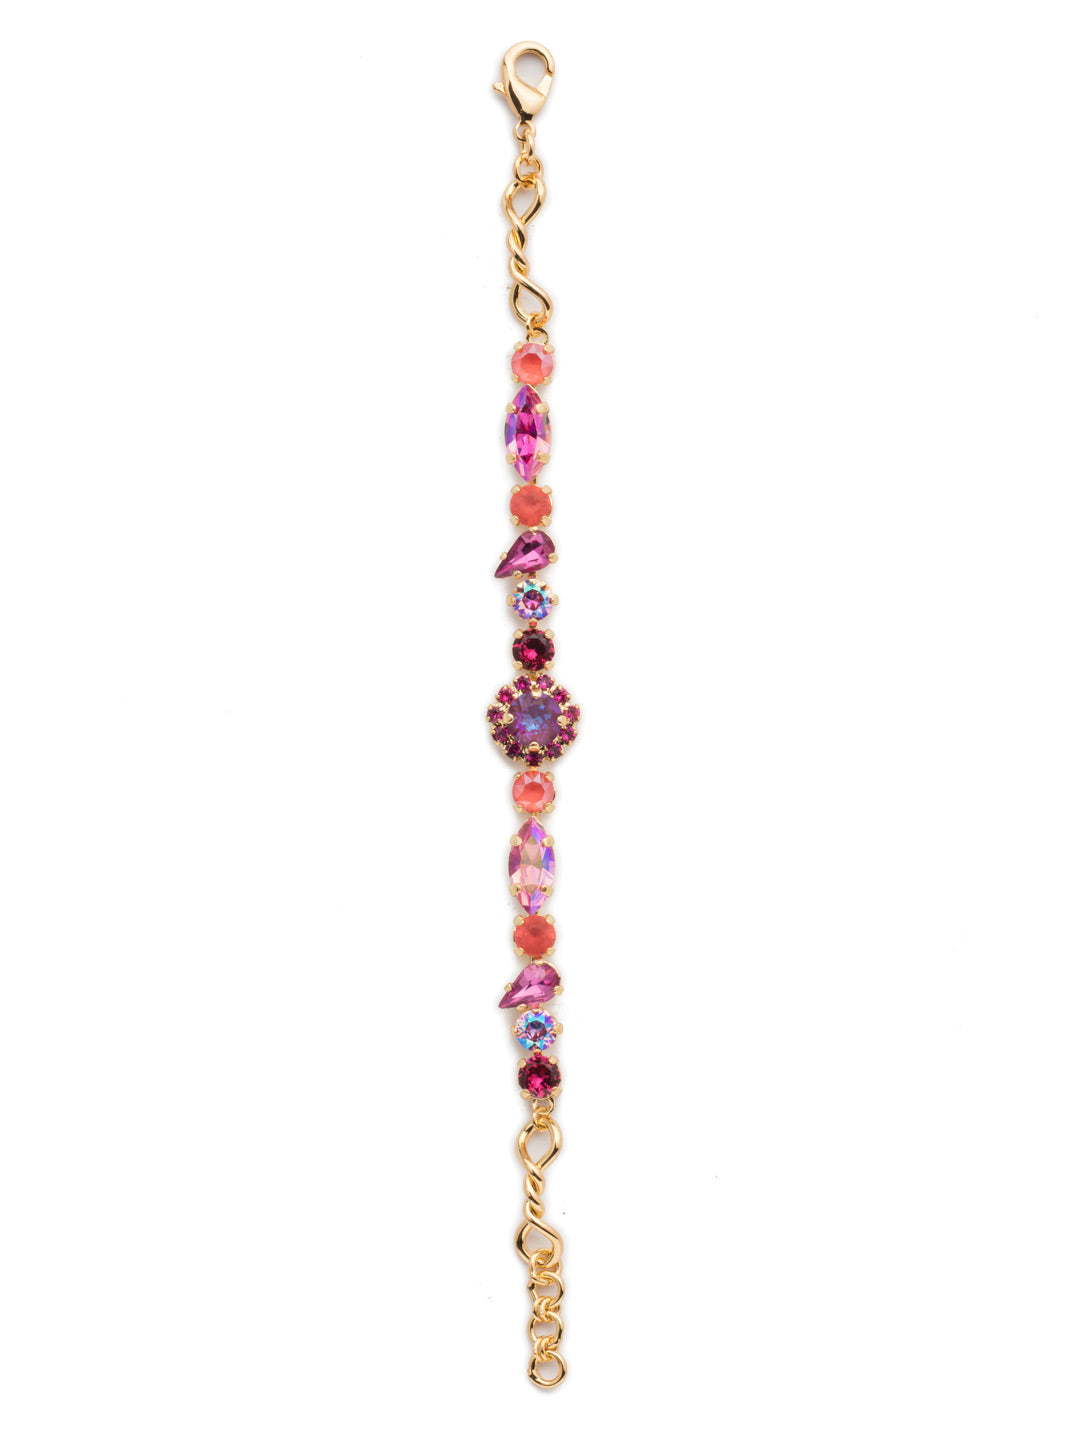 Nova Tennis Bracelet - BES9BGBGA - The Nova Tennis Bracelet combines hand-molded metalwork with the sparkling crystal gems Sorrelli is known for. Get a taste of it all with marquise and navette stones, just to name a few. From Sorrelli's Begonia collection in our Bright Gold-tone finish.